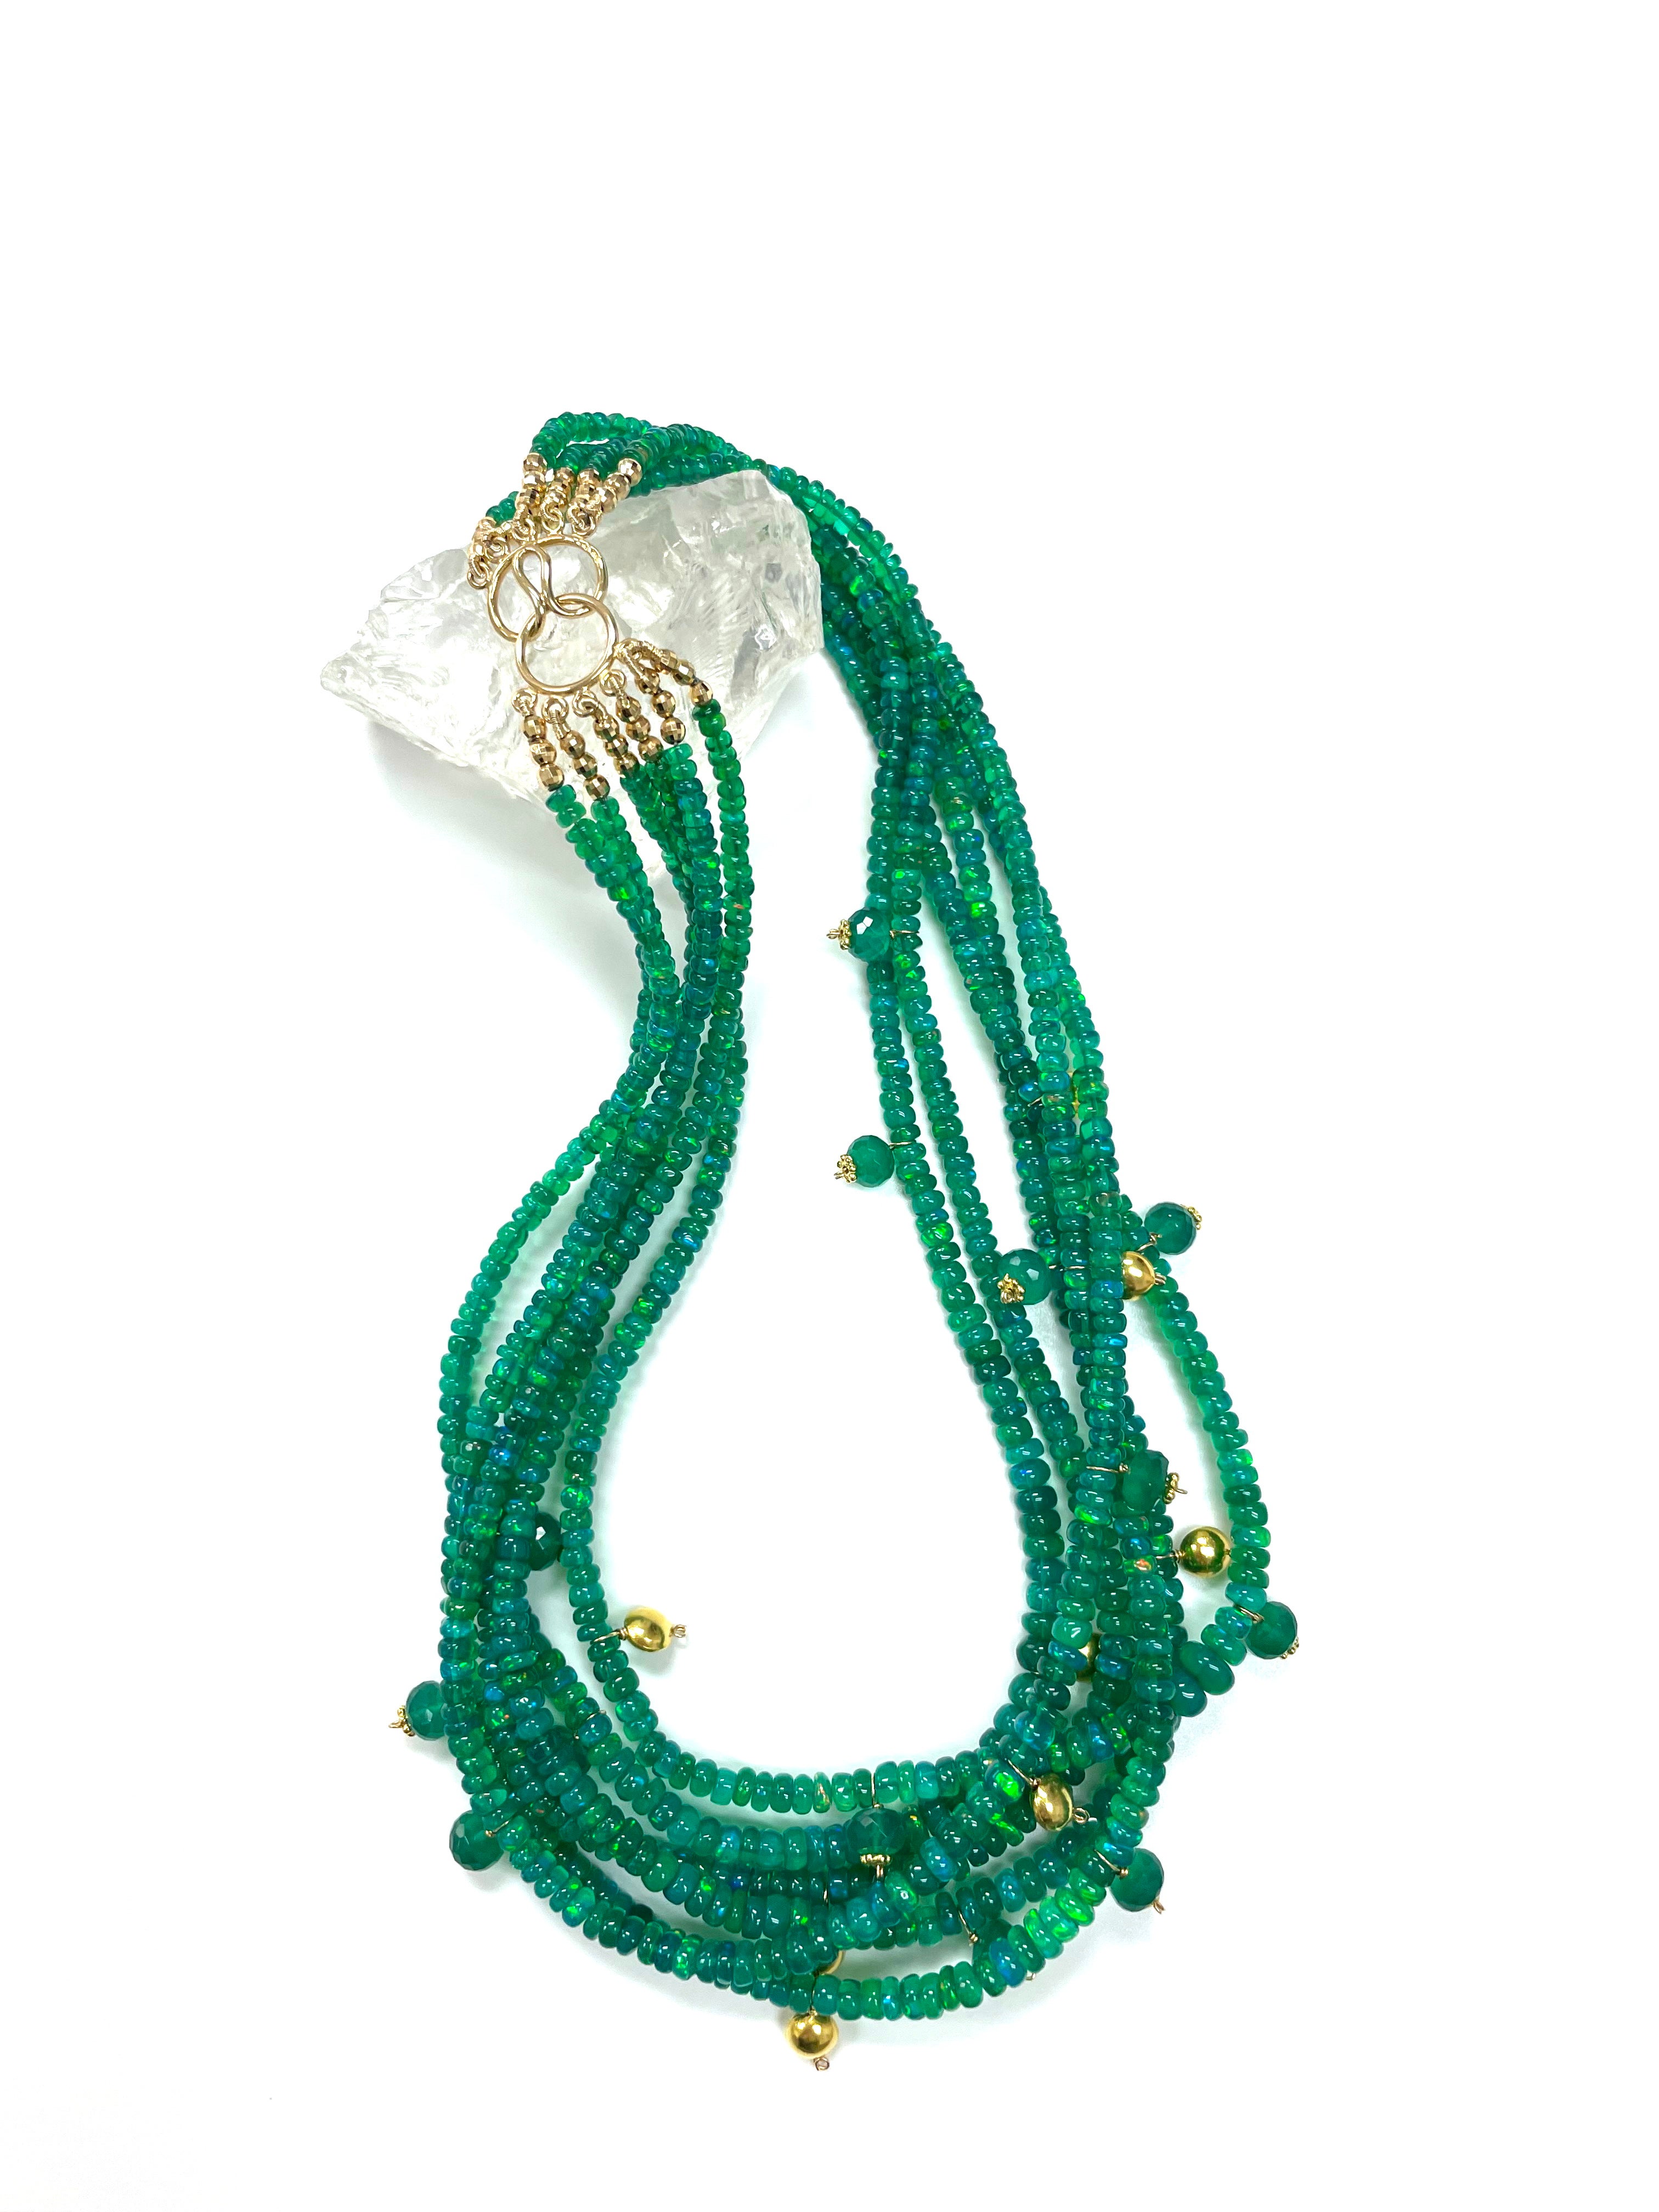 Artisan Green Opal with Dangling 18k YG Accents Multistrand Necklace For Sale